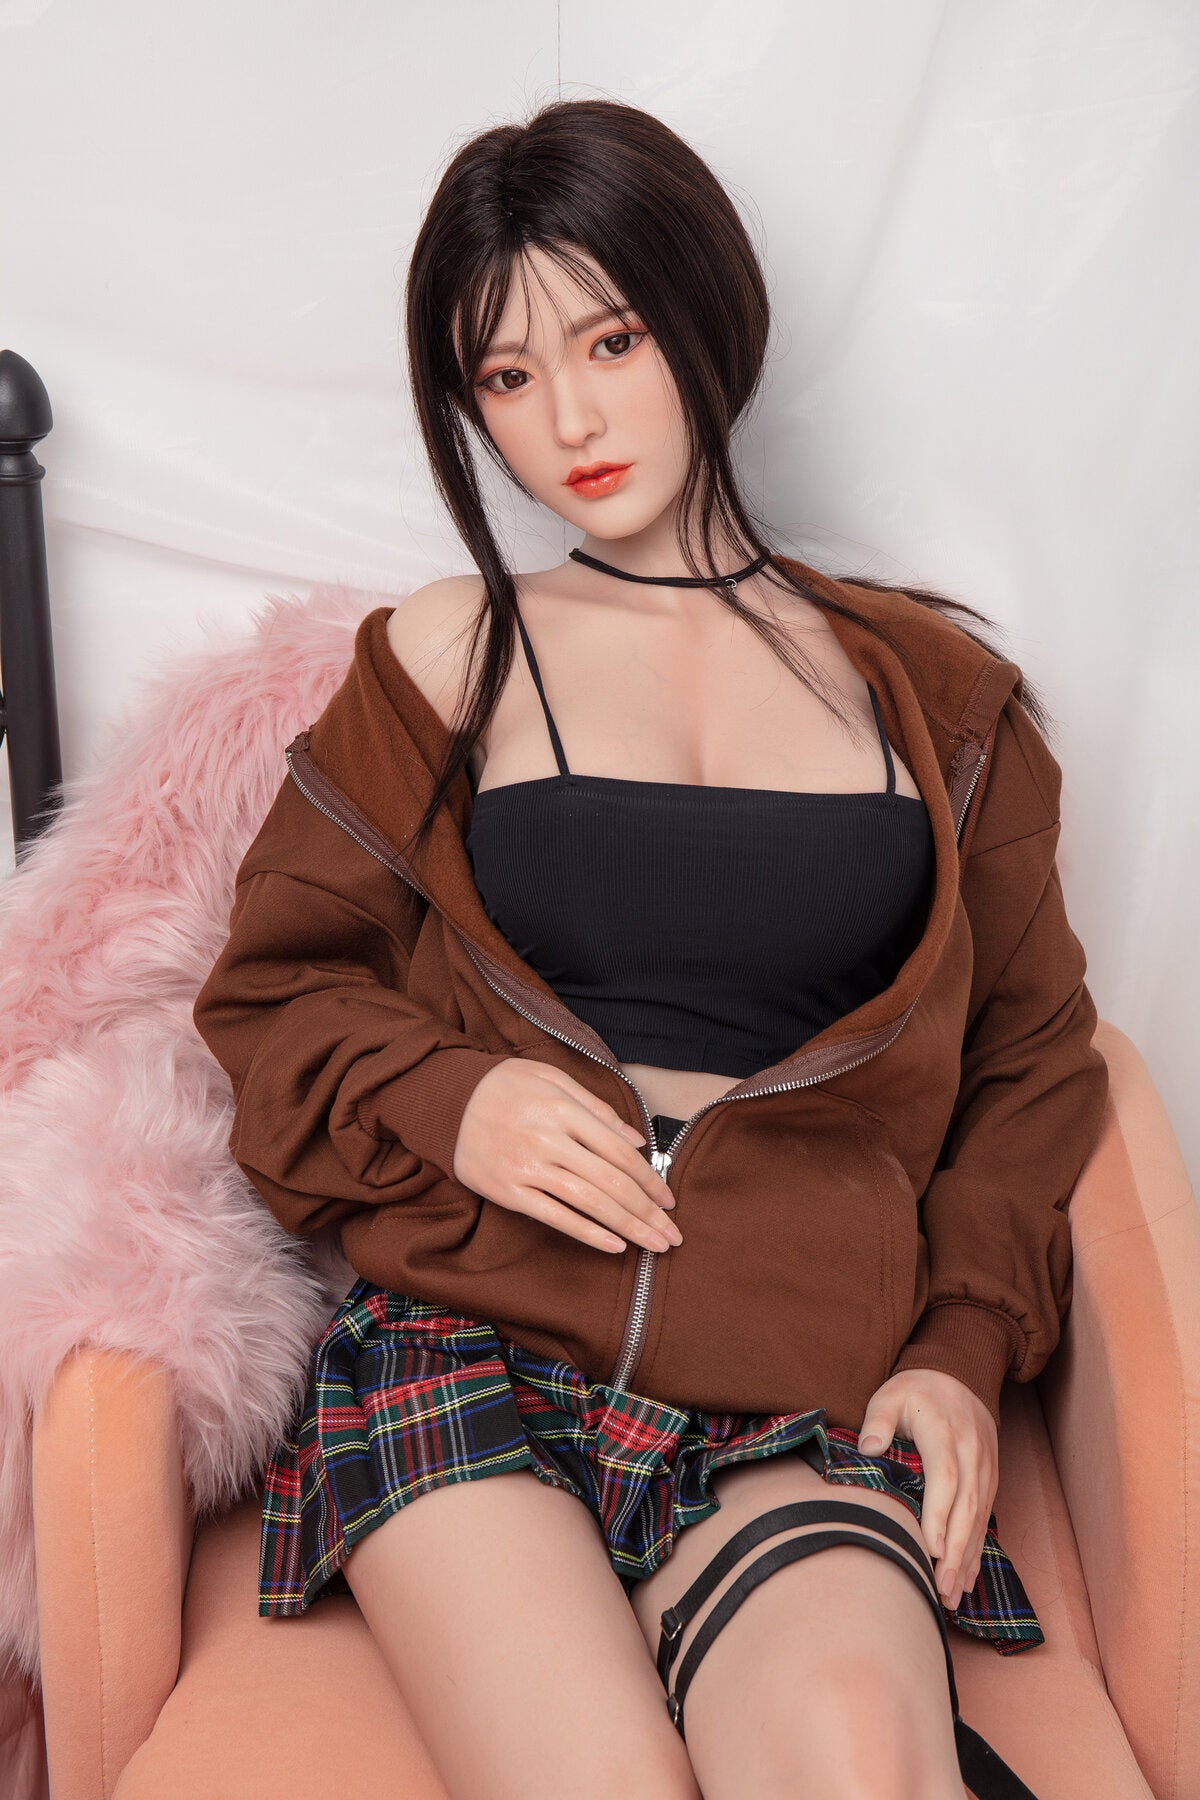 JX Doll | 170cm (5' 7") C-cup Full Silicone Super Real Busty Sex Doll - Fei